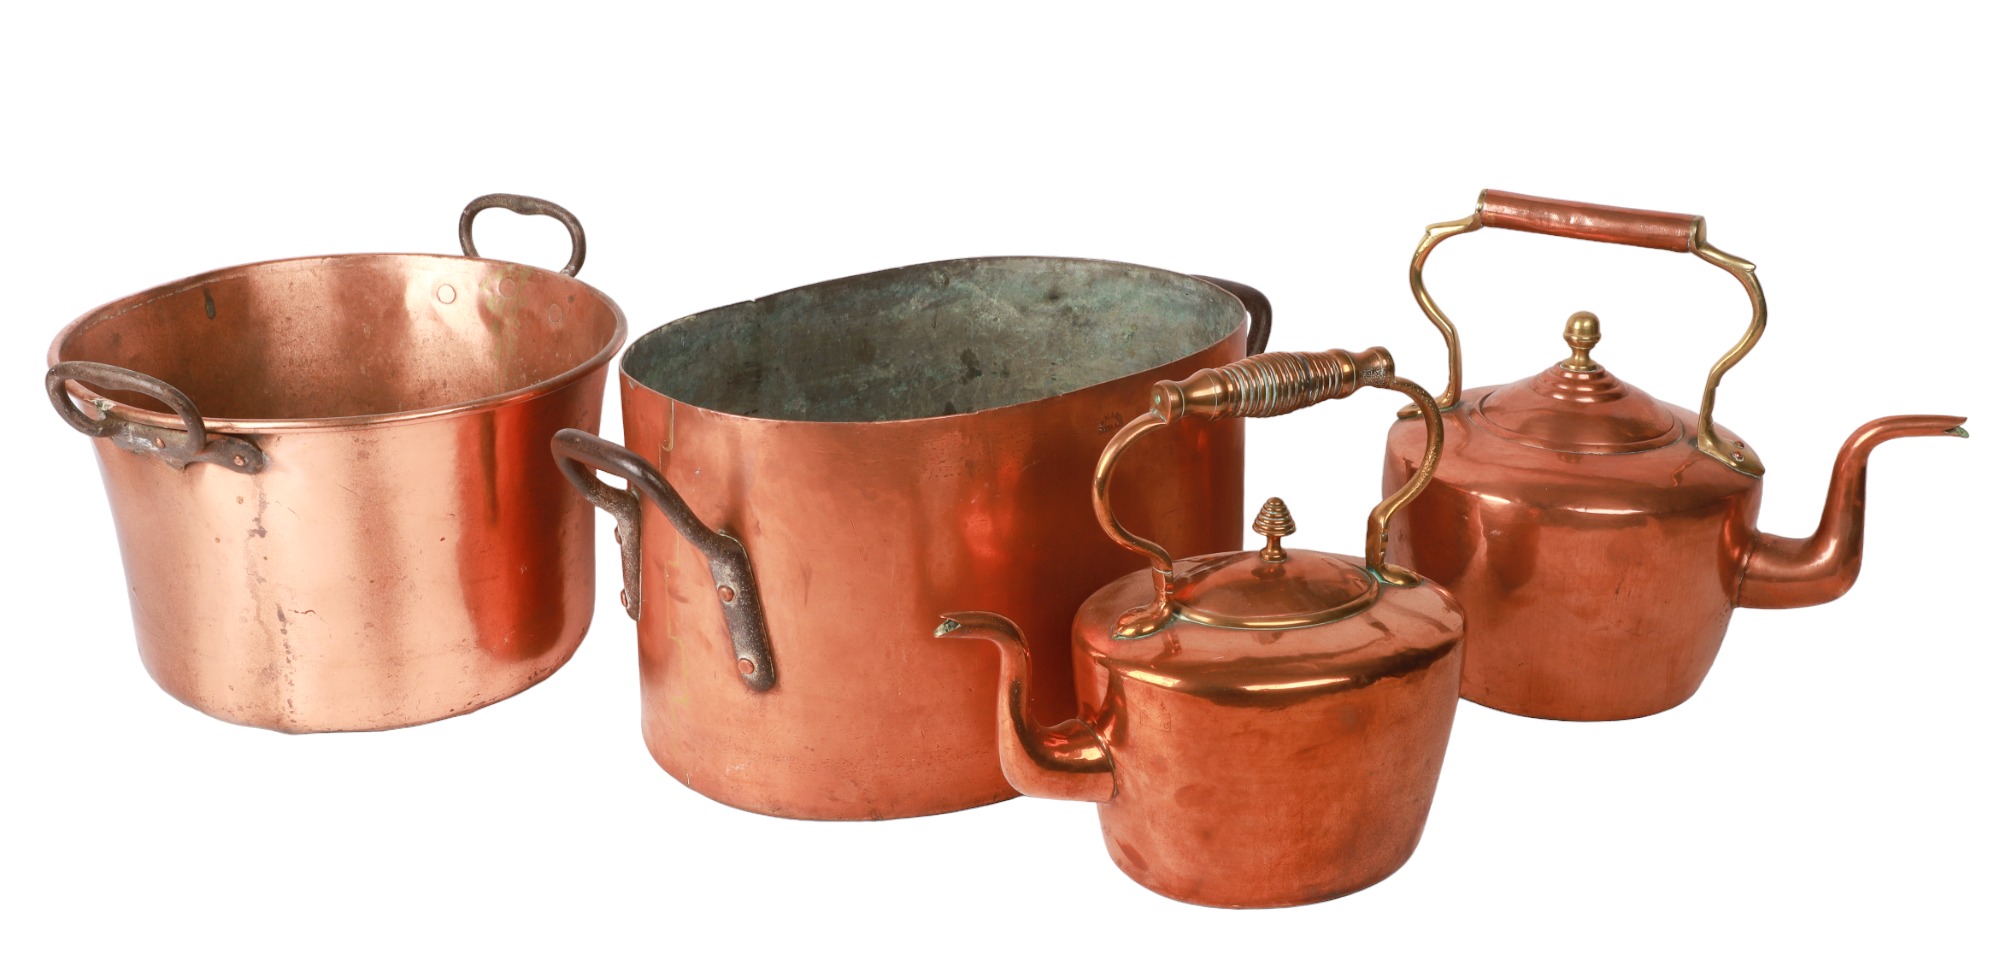 (4) Copper roasting pan, pot and